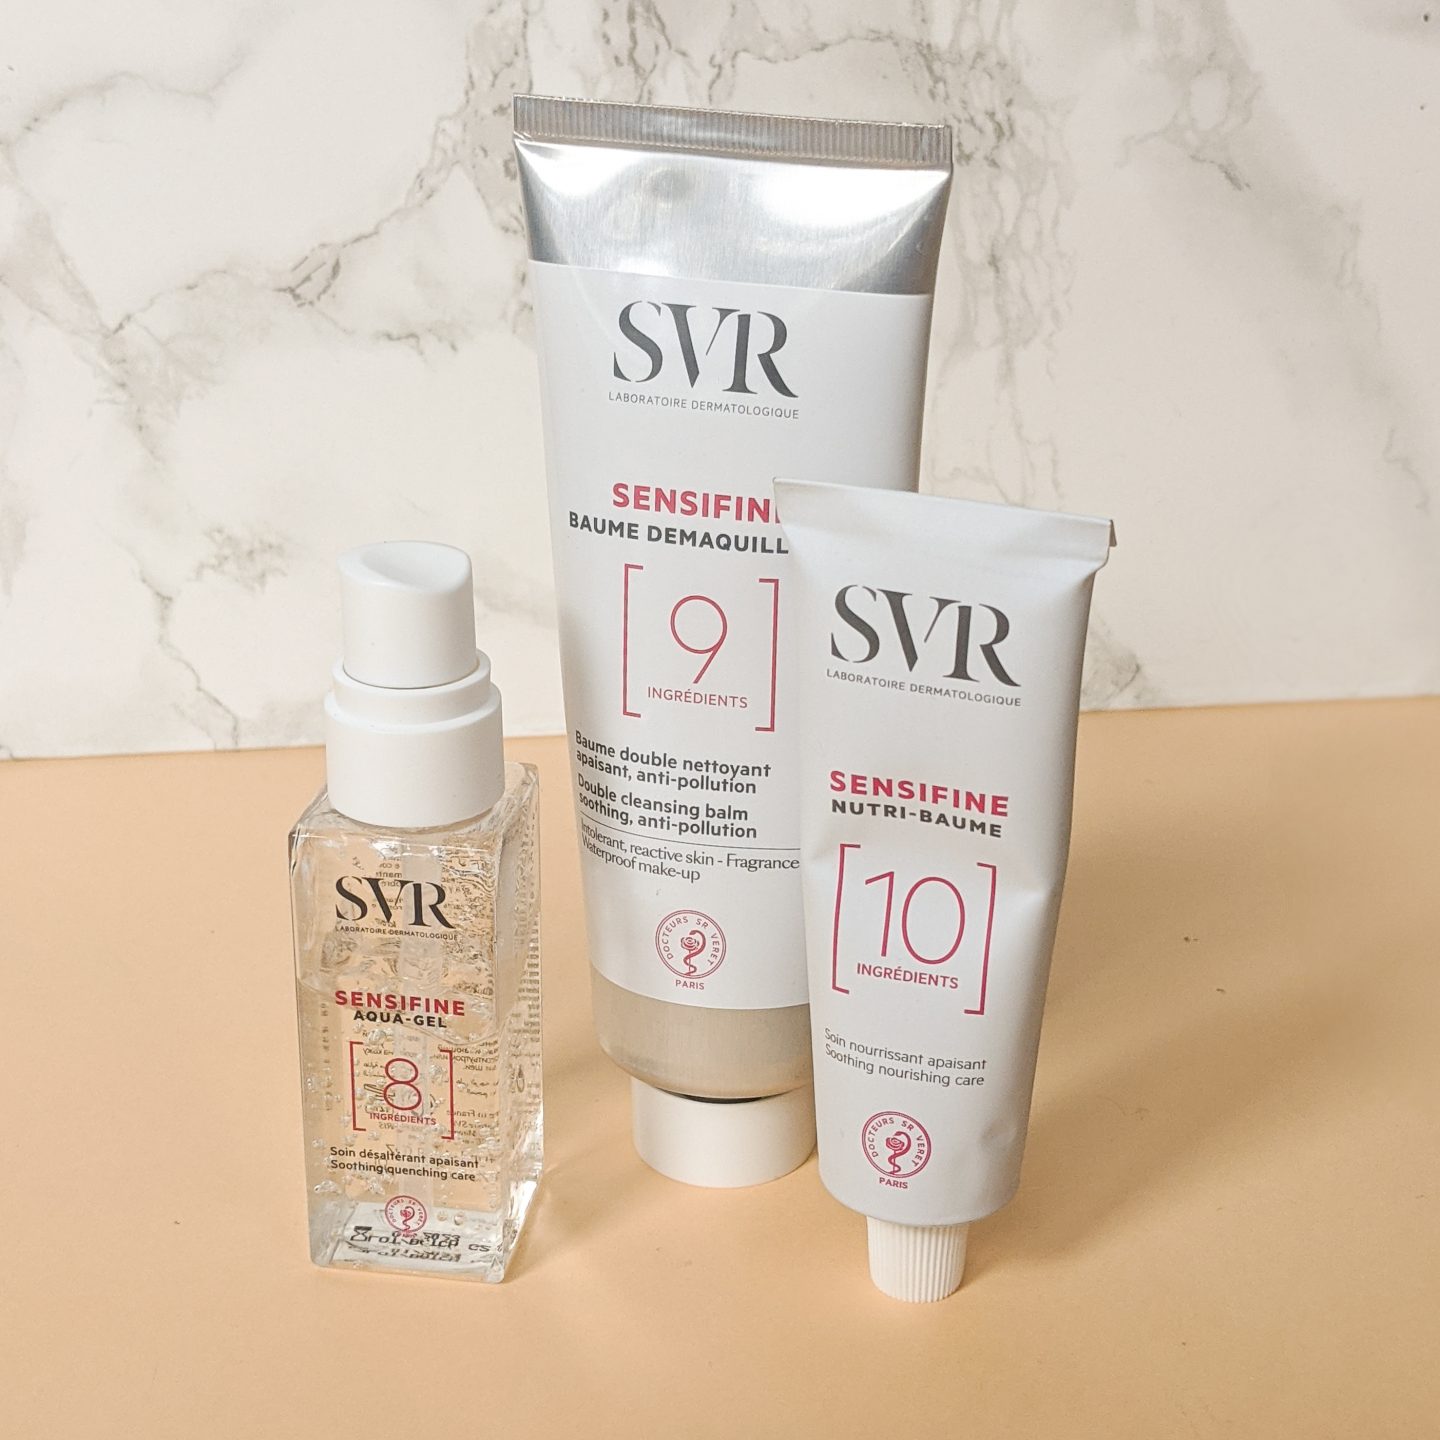 Review of the SVR Sensifine skincare range. I tested out the hero products and wrote about how my rosacea fared with this simple, minimal ingredient range. Skincare for sensitive skin, best skincare for rosacea. Why is French skincare so good?

#talontedlex #skincaretips #SVRskincare #skincareadvice